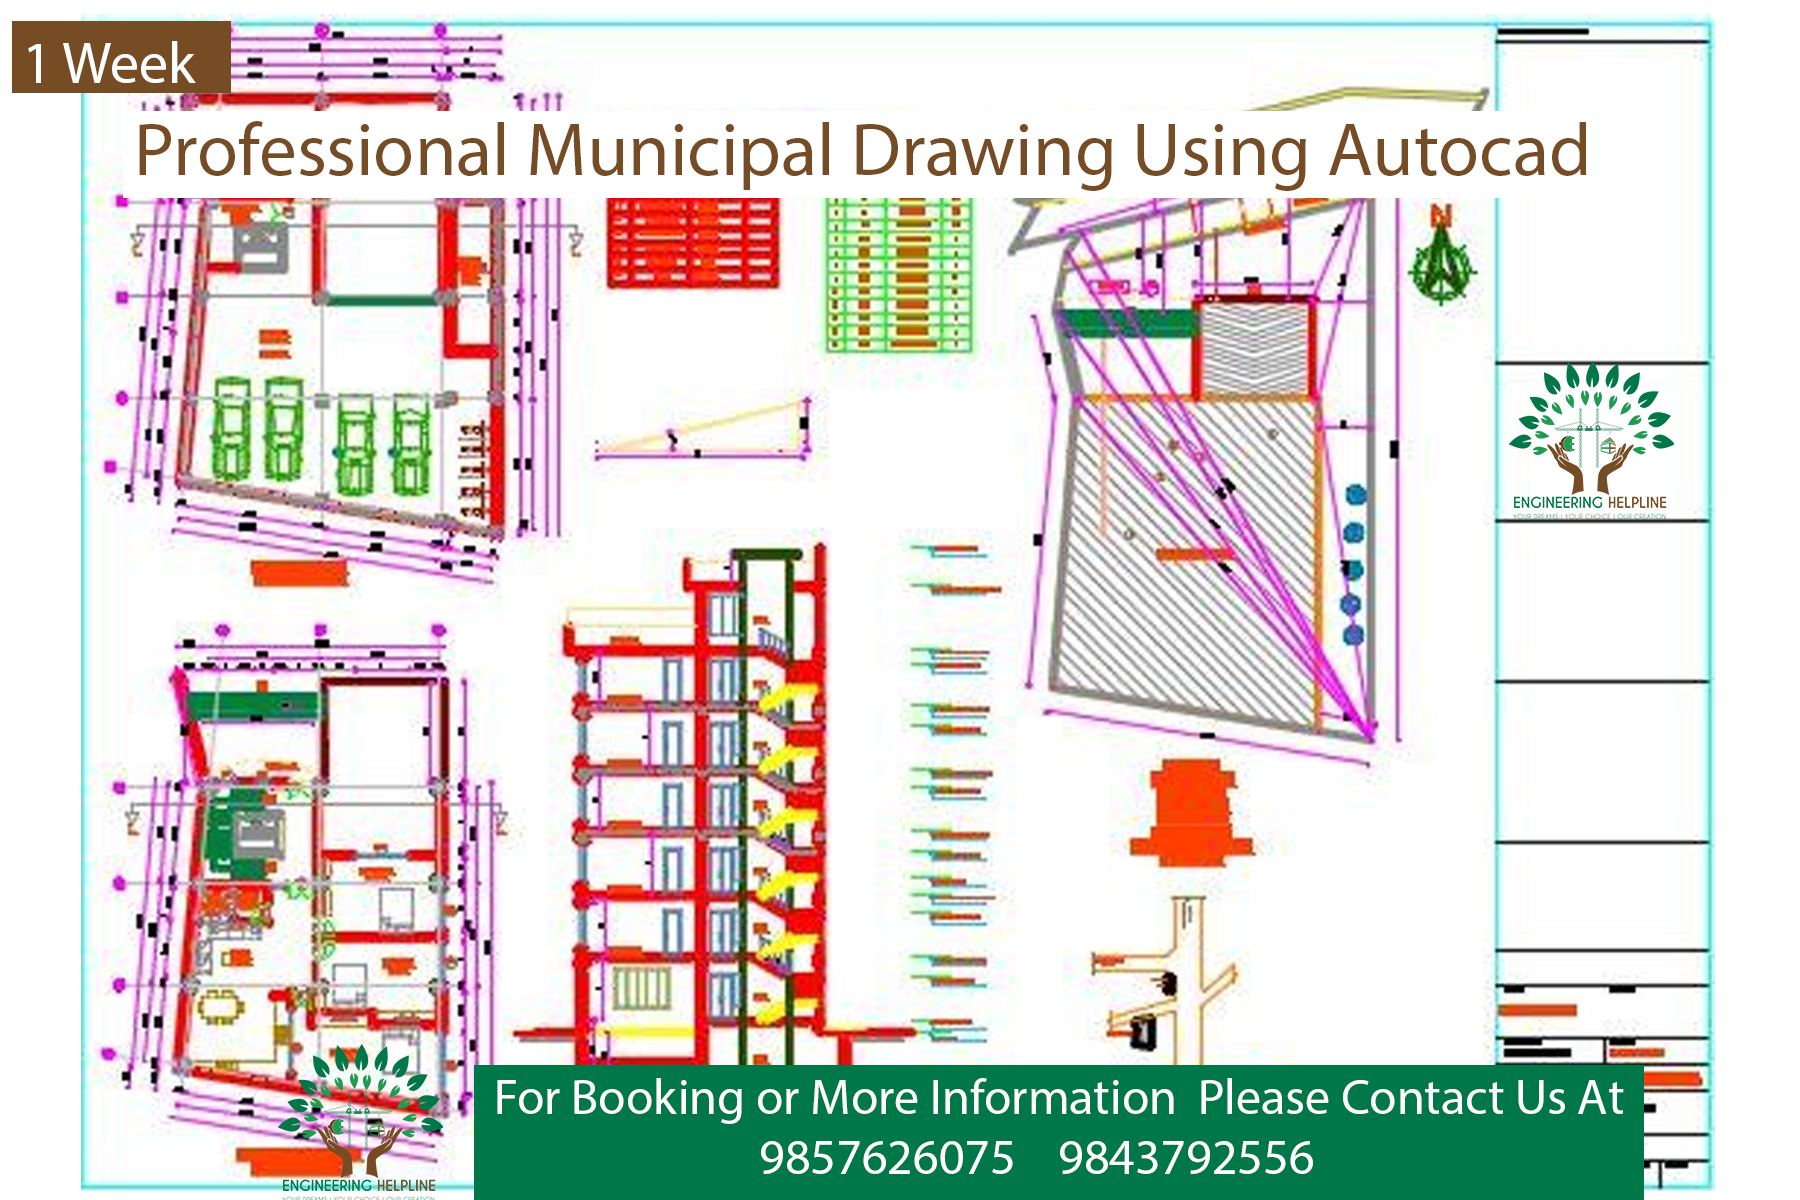 Basic To Advance Session For  Professional Municipal Drawing Using AUTOCAD